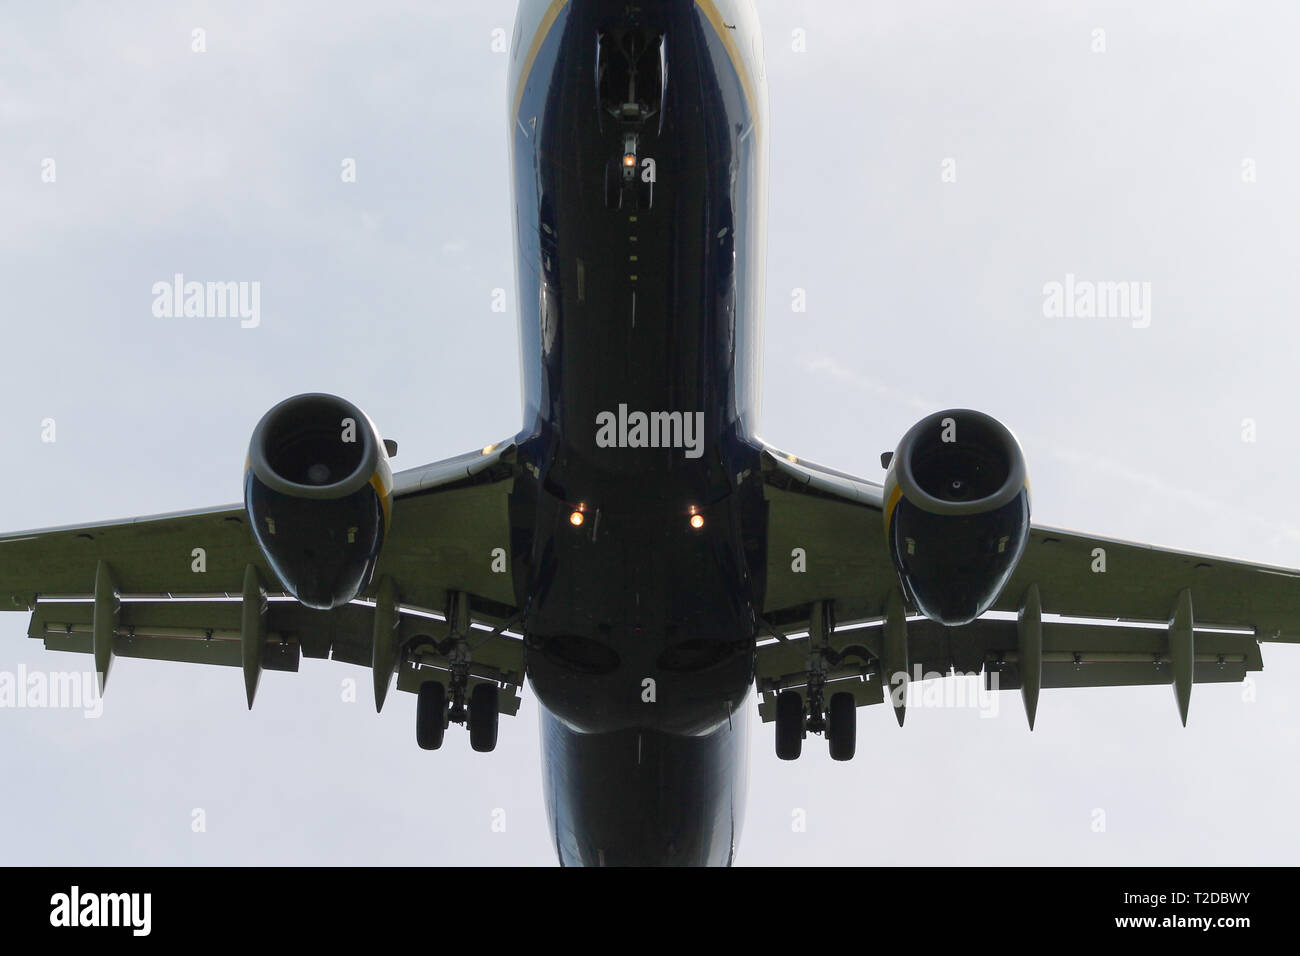 Ryanair Boeing 737-800 Jet plane landing with landing gear down and flaps extended transport Stock Photo